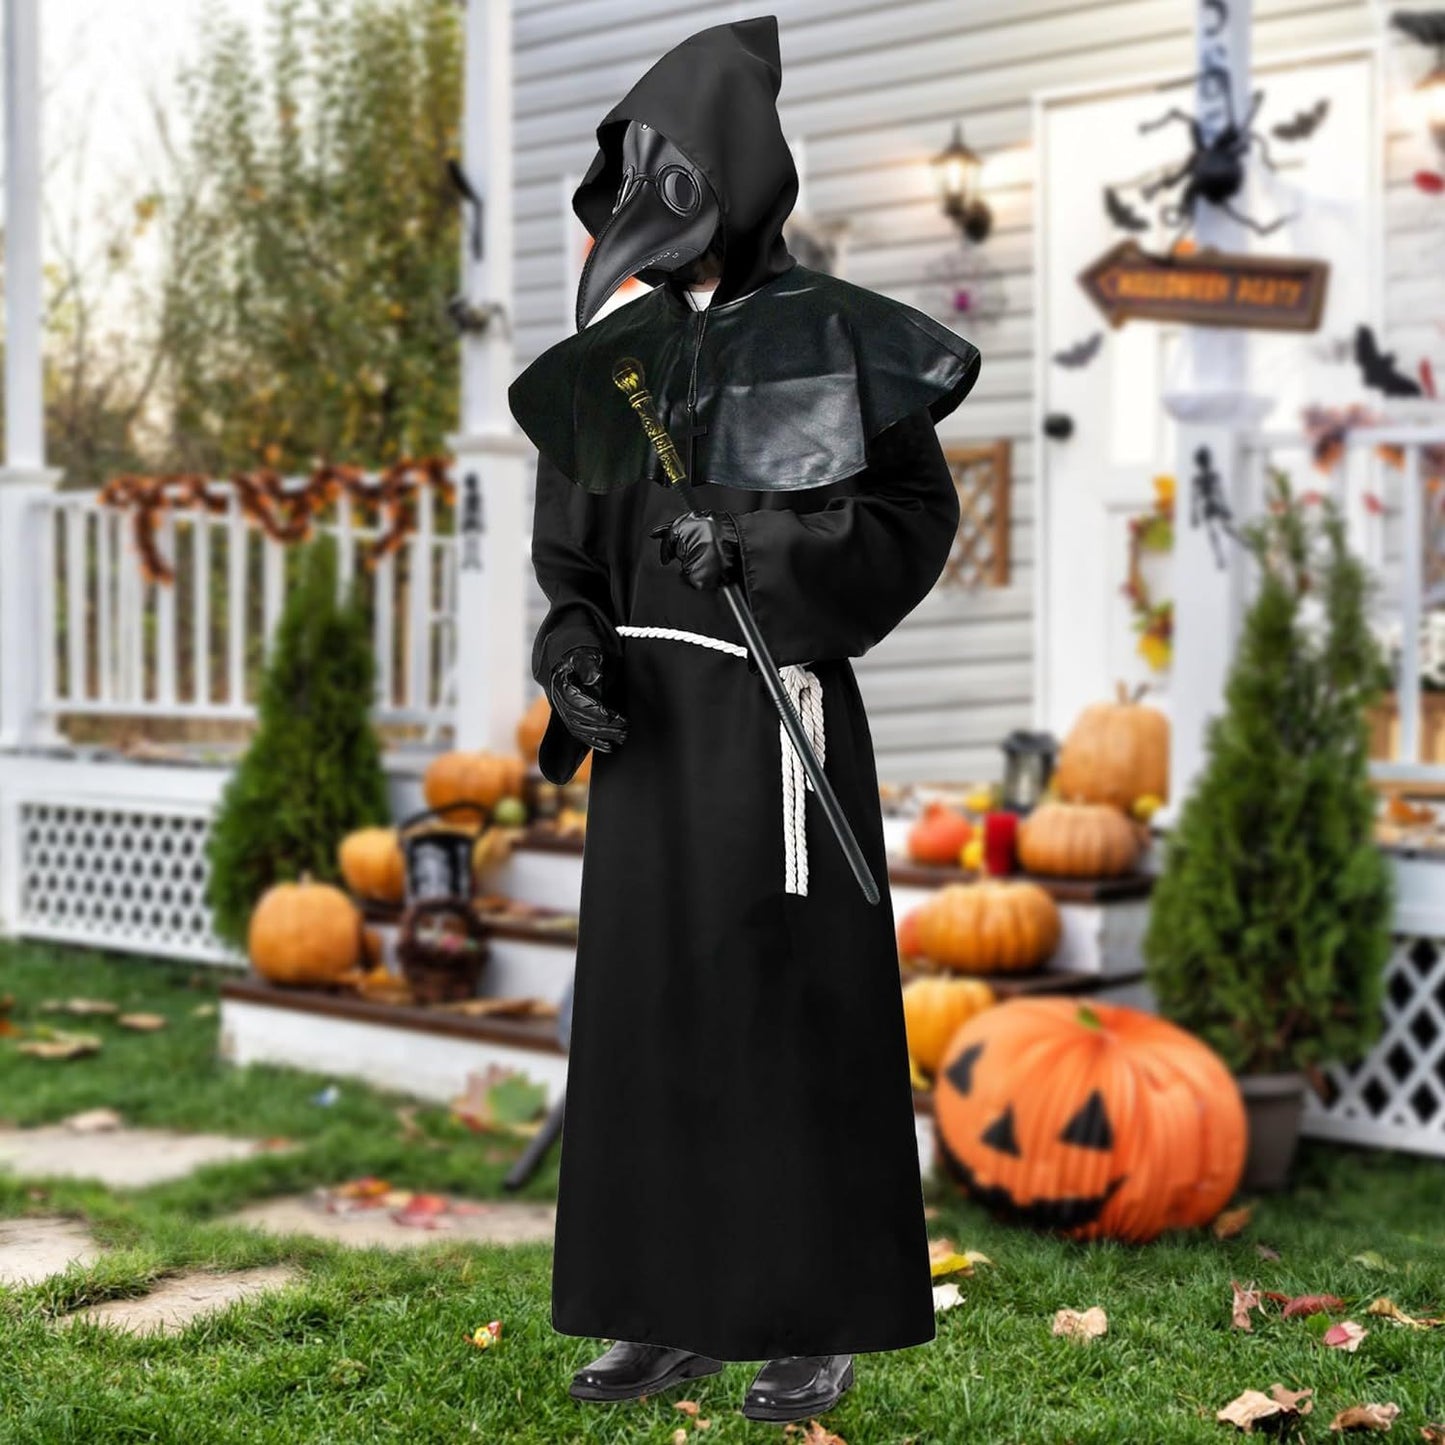 New Halloween Plague Doctor Cosplay Costume With Accessories-XL-8 Pieces